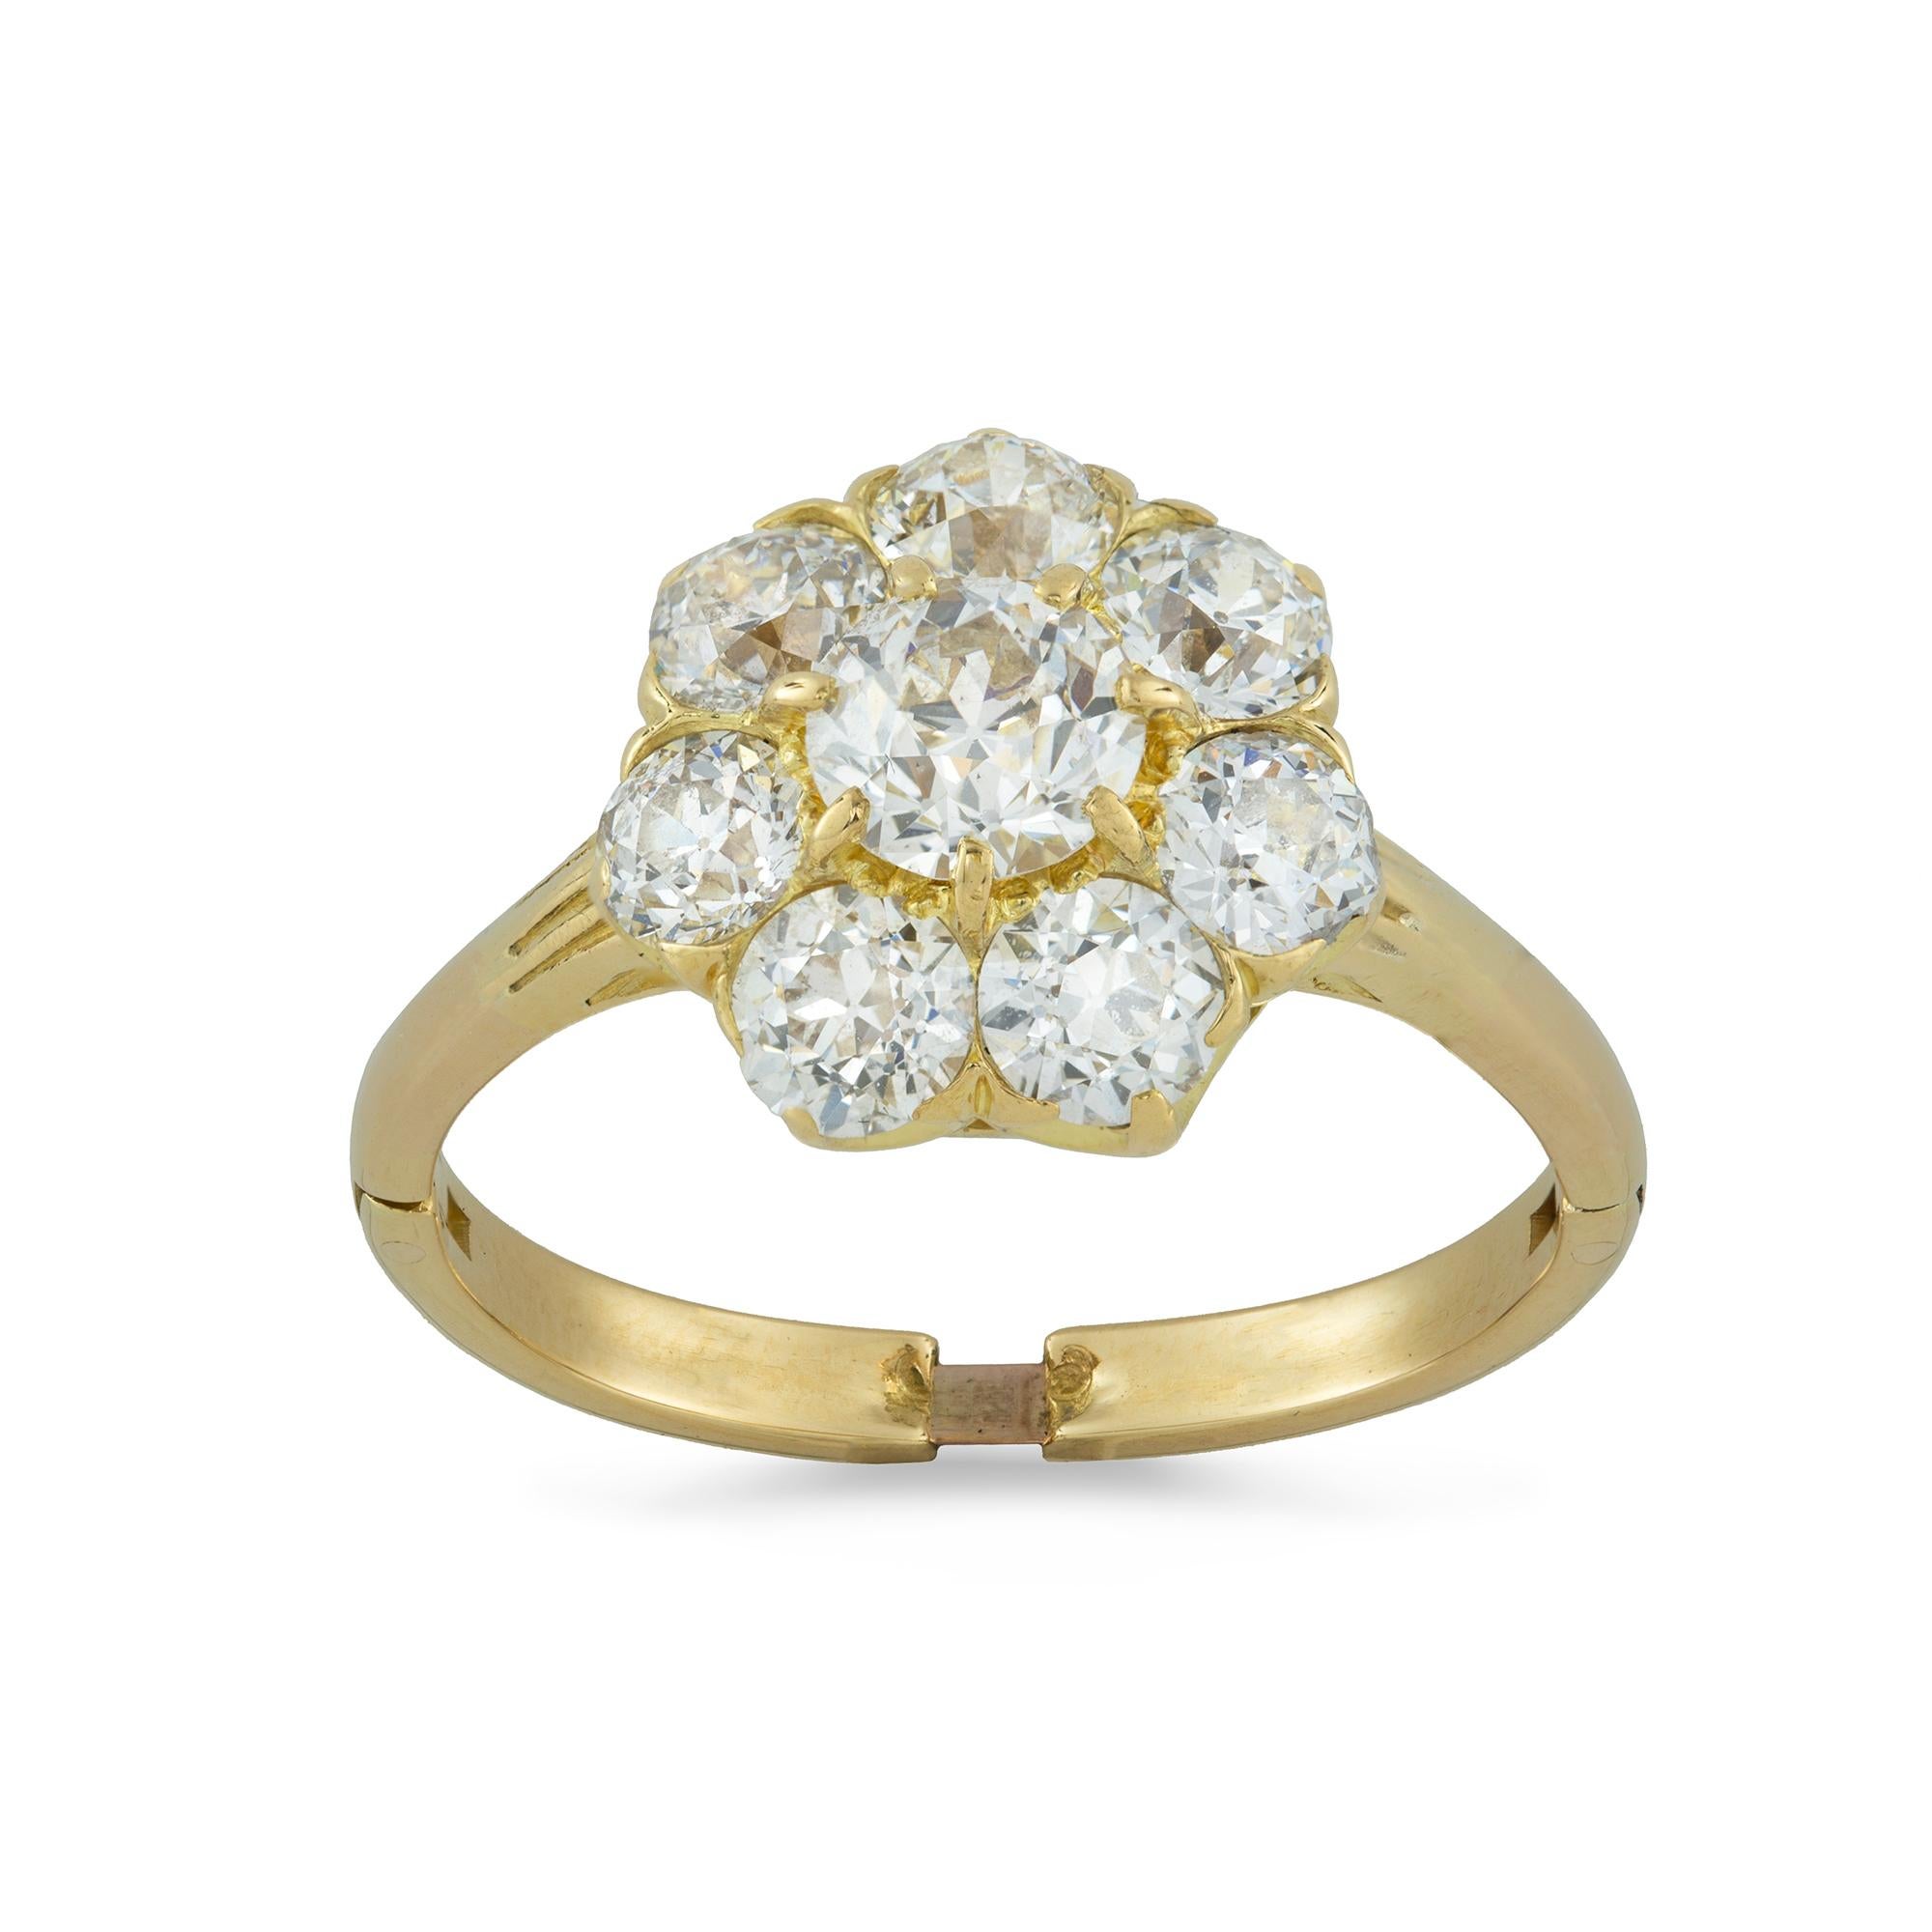 Late Victorian Late-Victorian Diamond Cluster Ring